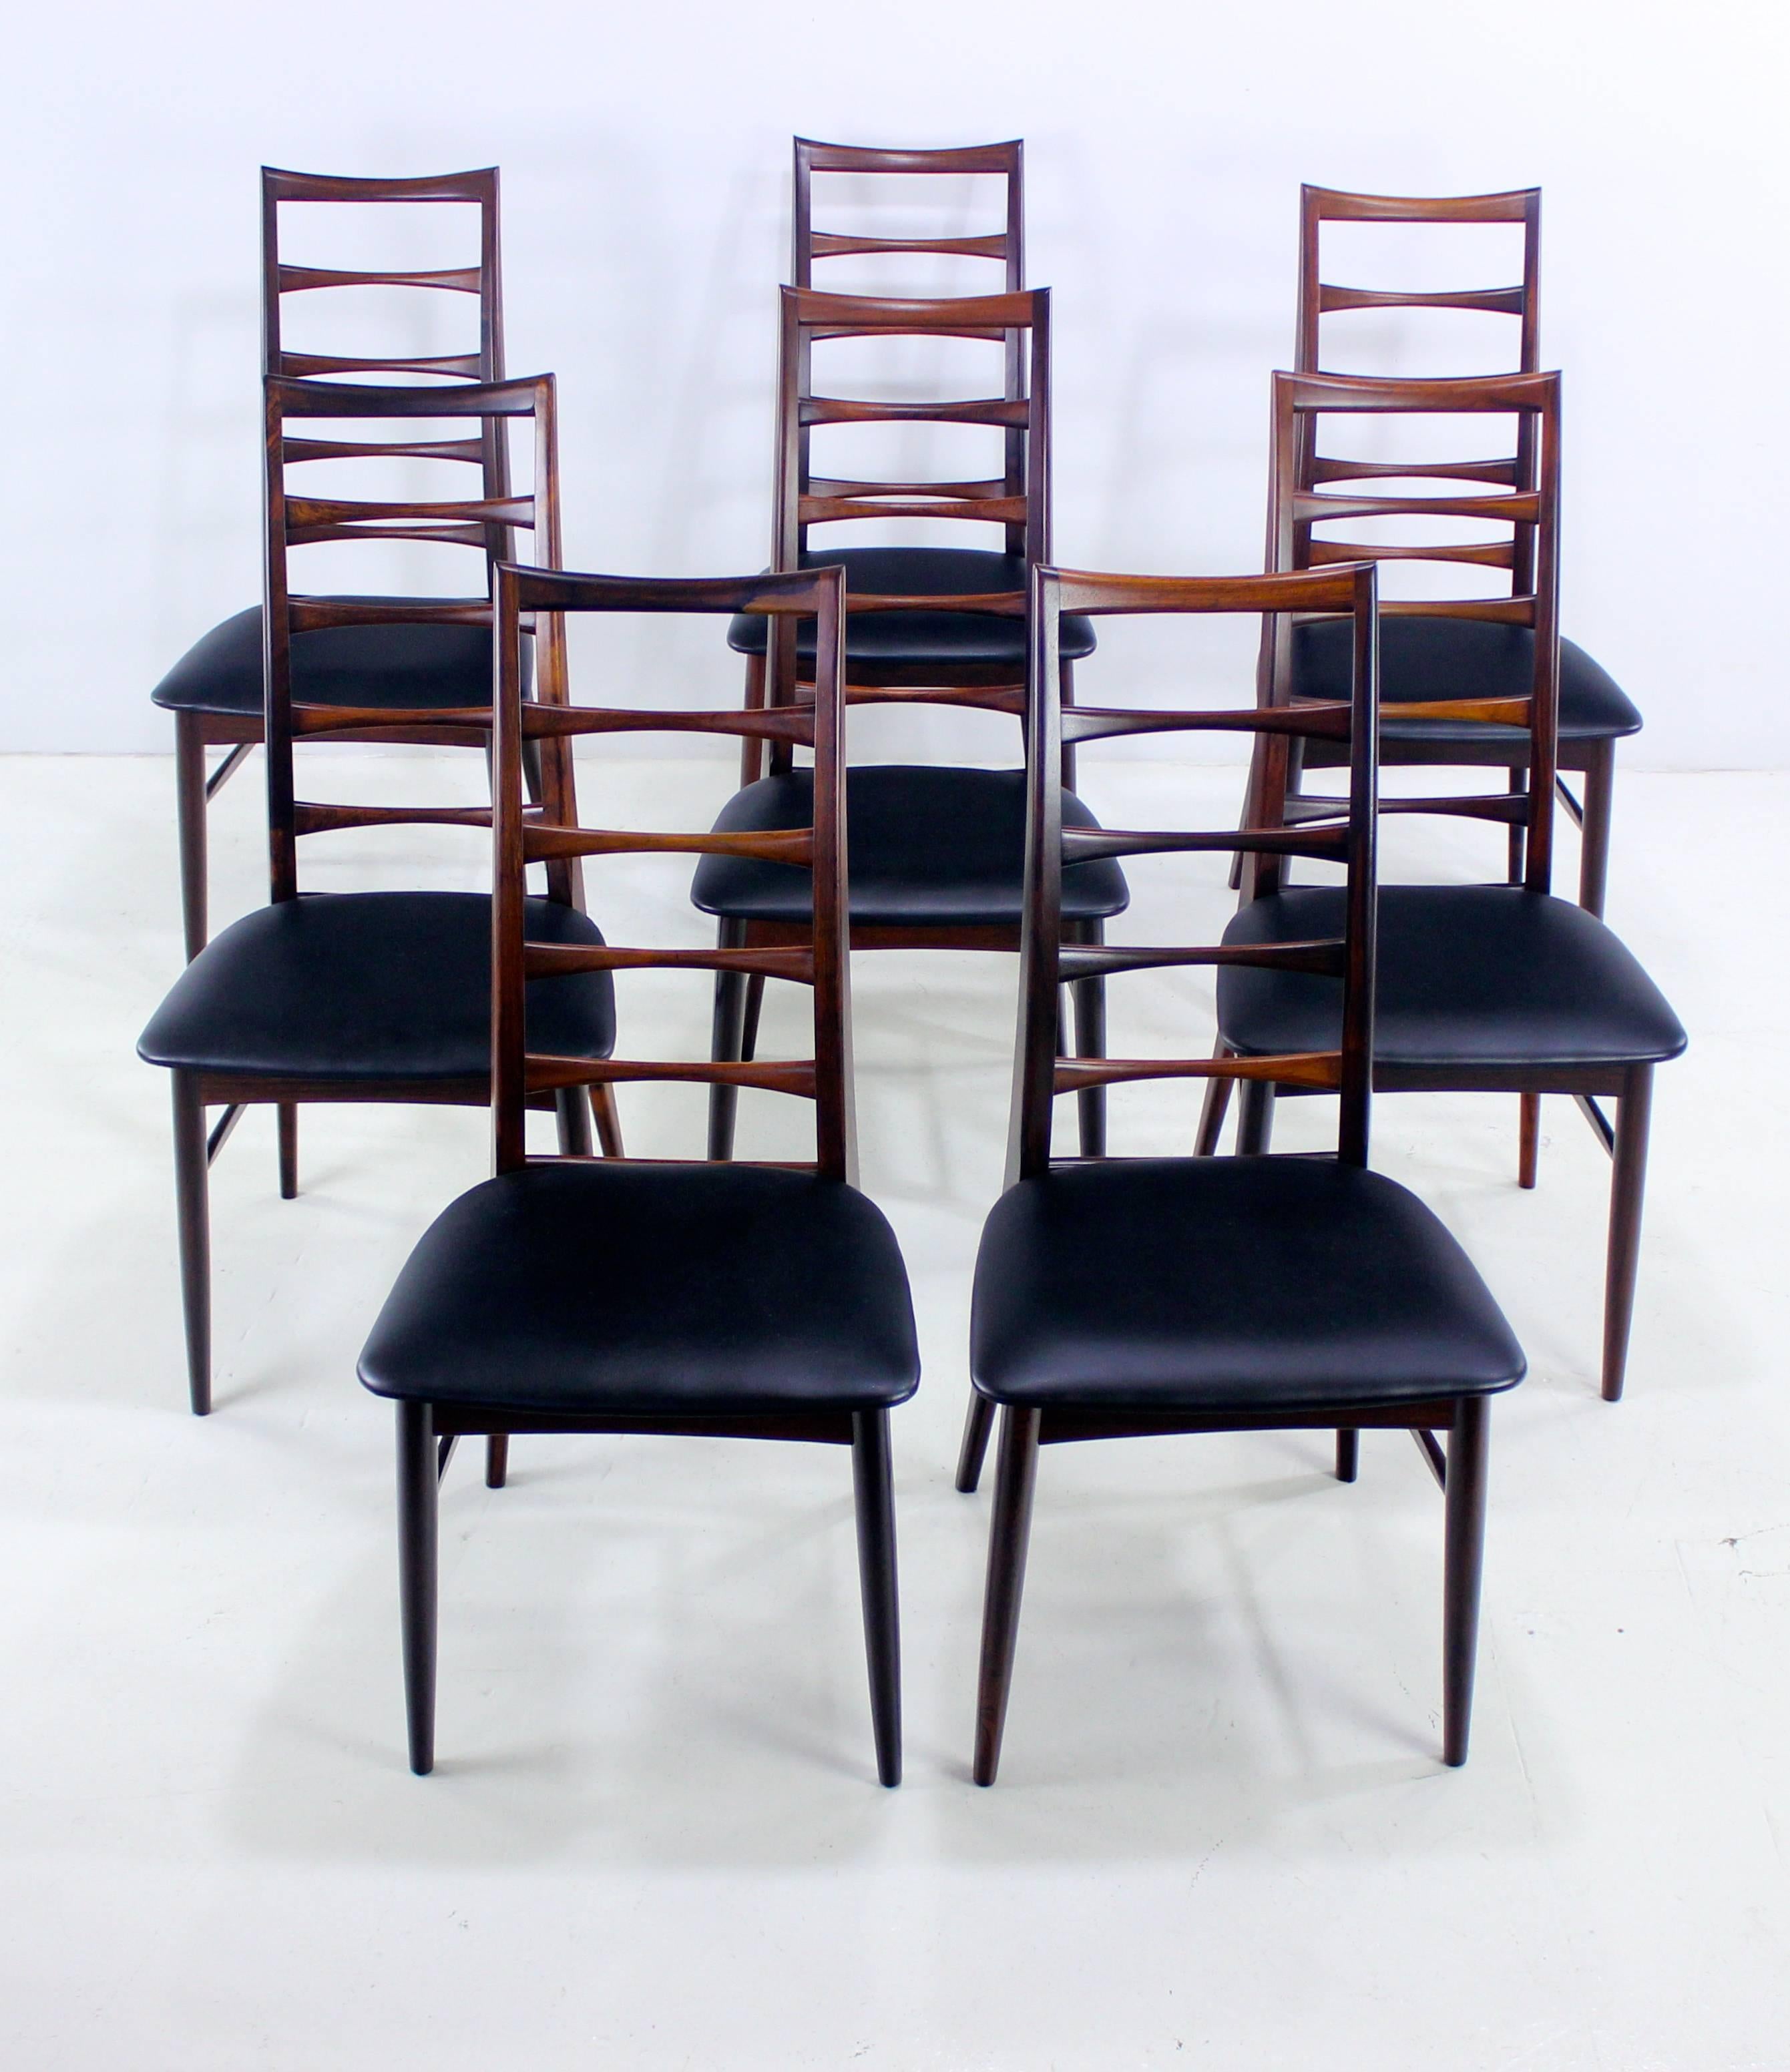 Eight Danish modern "Liz" dining chairs designed by Niels Koefoed.
Koefoeds Hornslett, maker.
Rich rosewood with elegant, tall ladder backs.
Newly upholstered in highest quality black leatherette.
Professionally restored and refinished